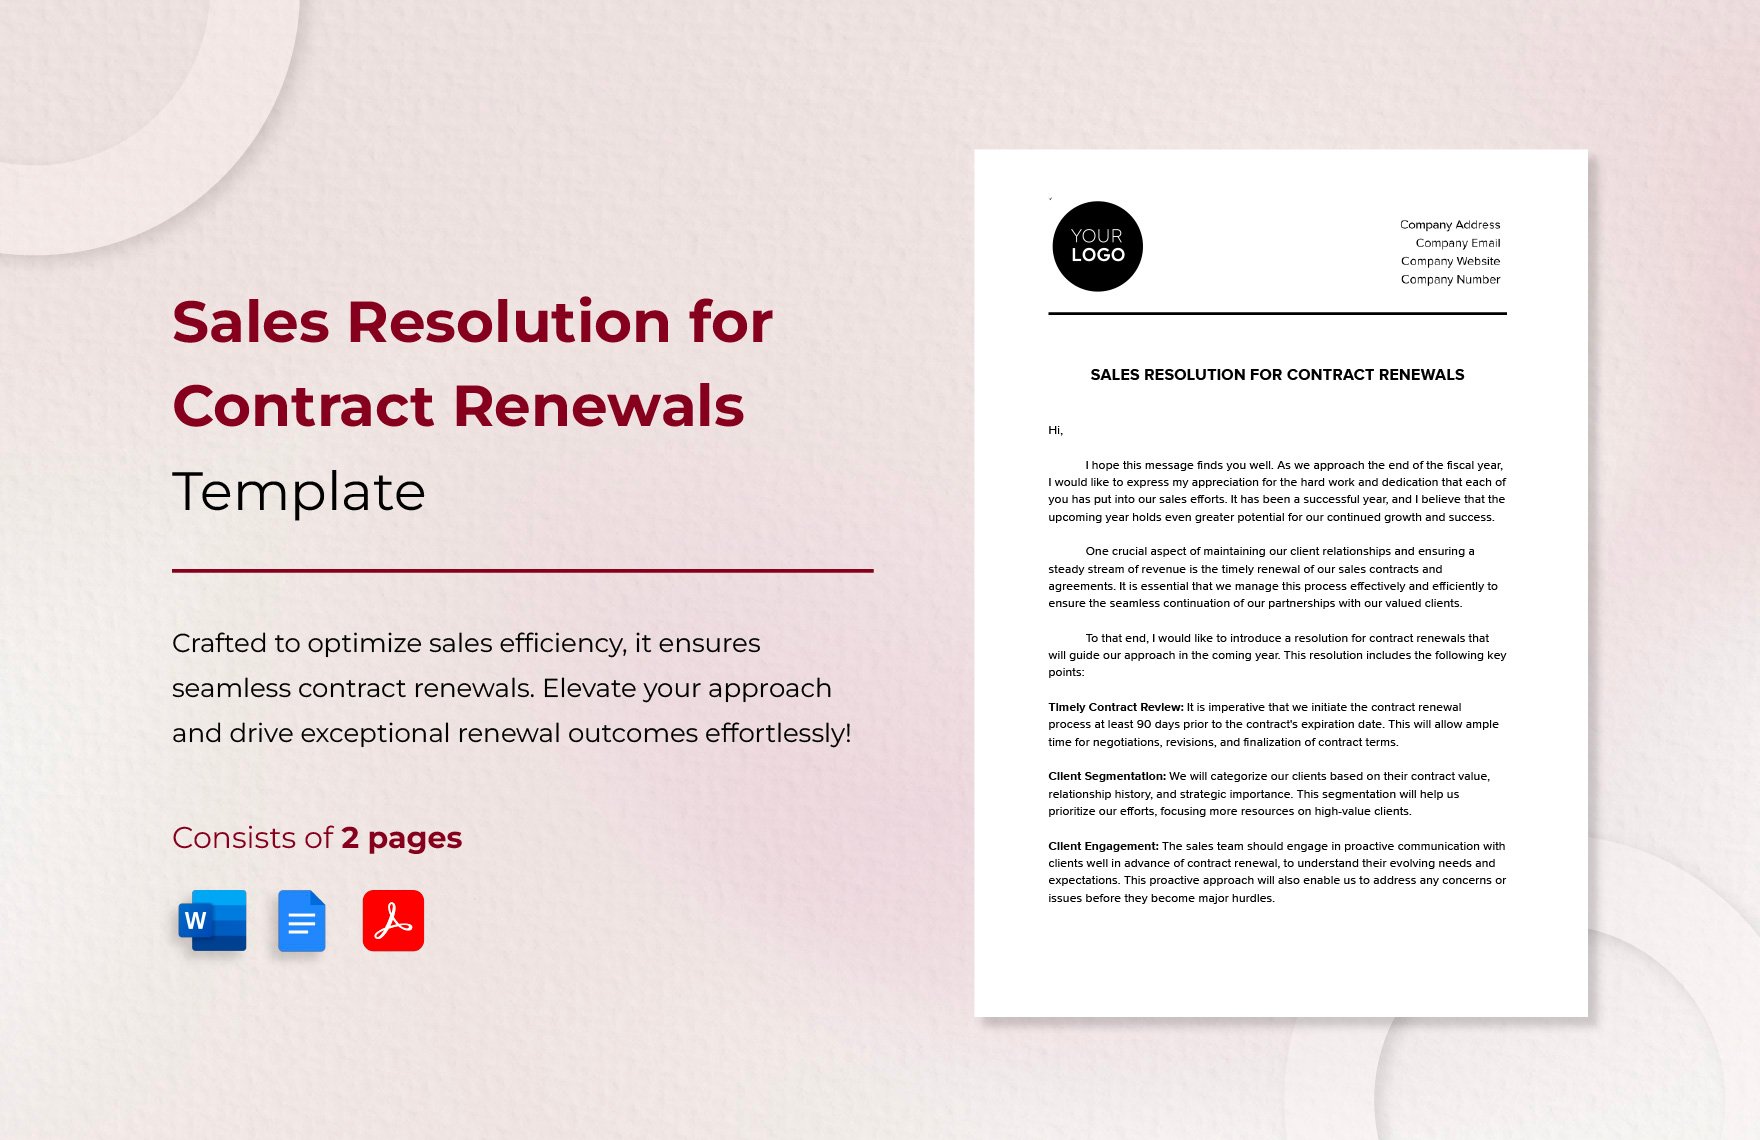 Sales Resolution for Contract Renewals Template